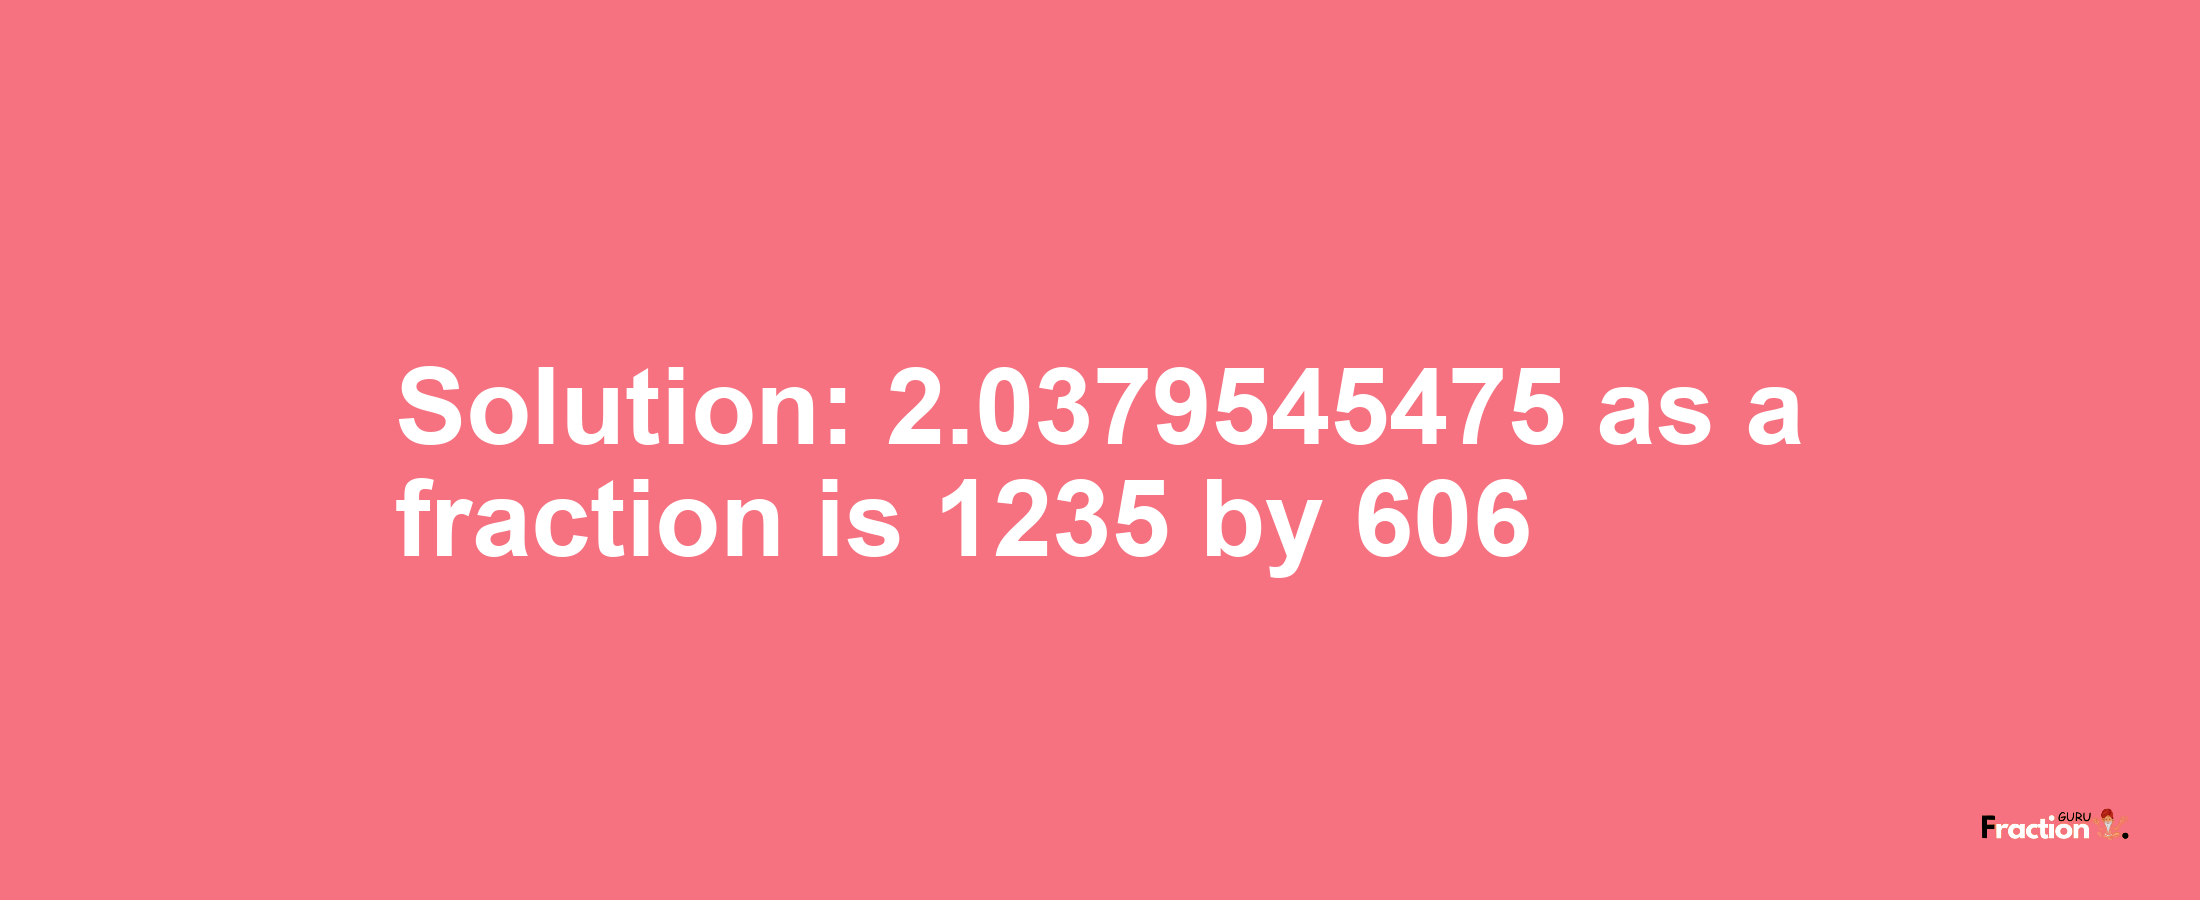 Solution:2.0379545475 as a fraction is 1235/606